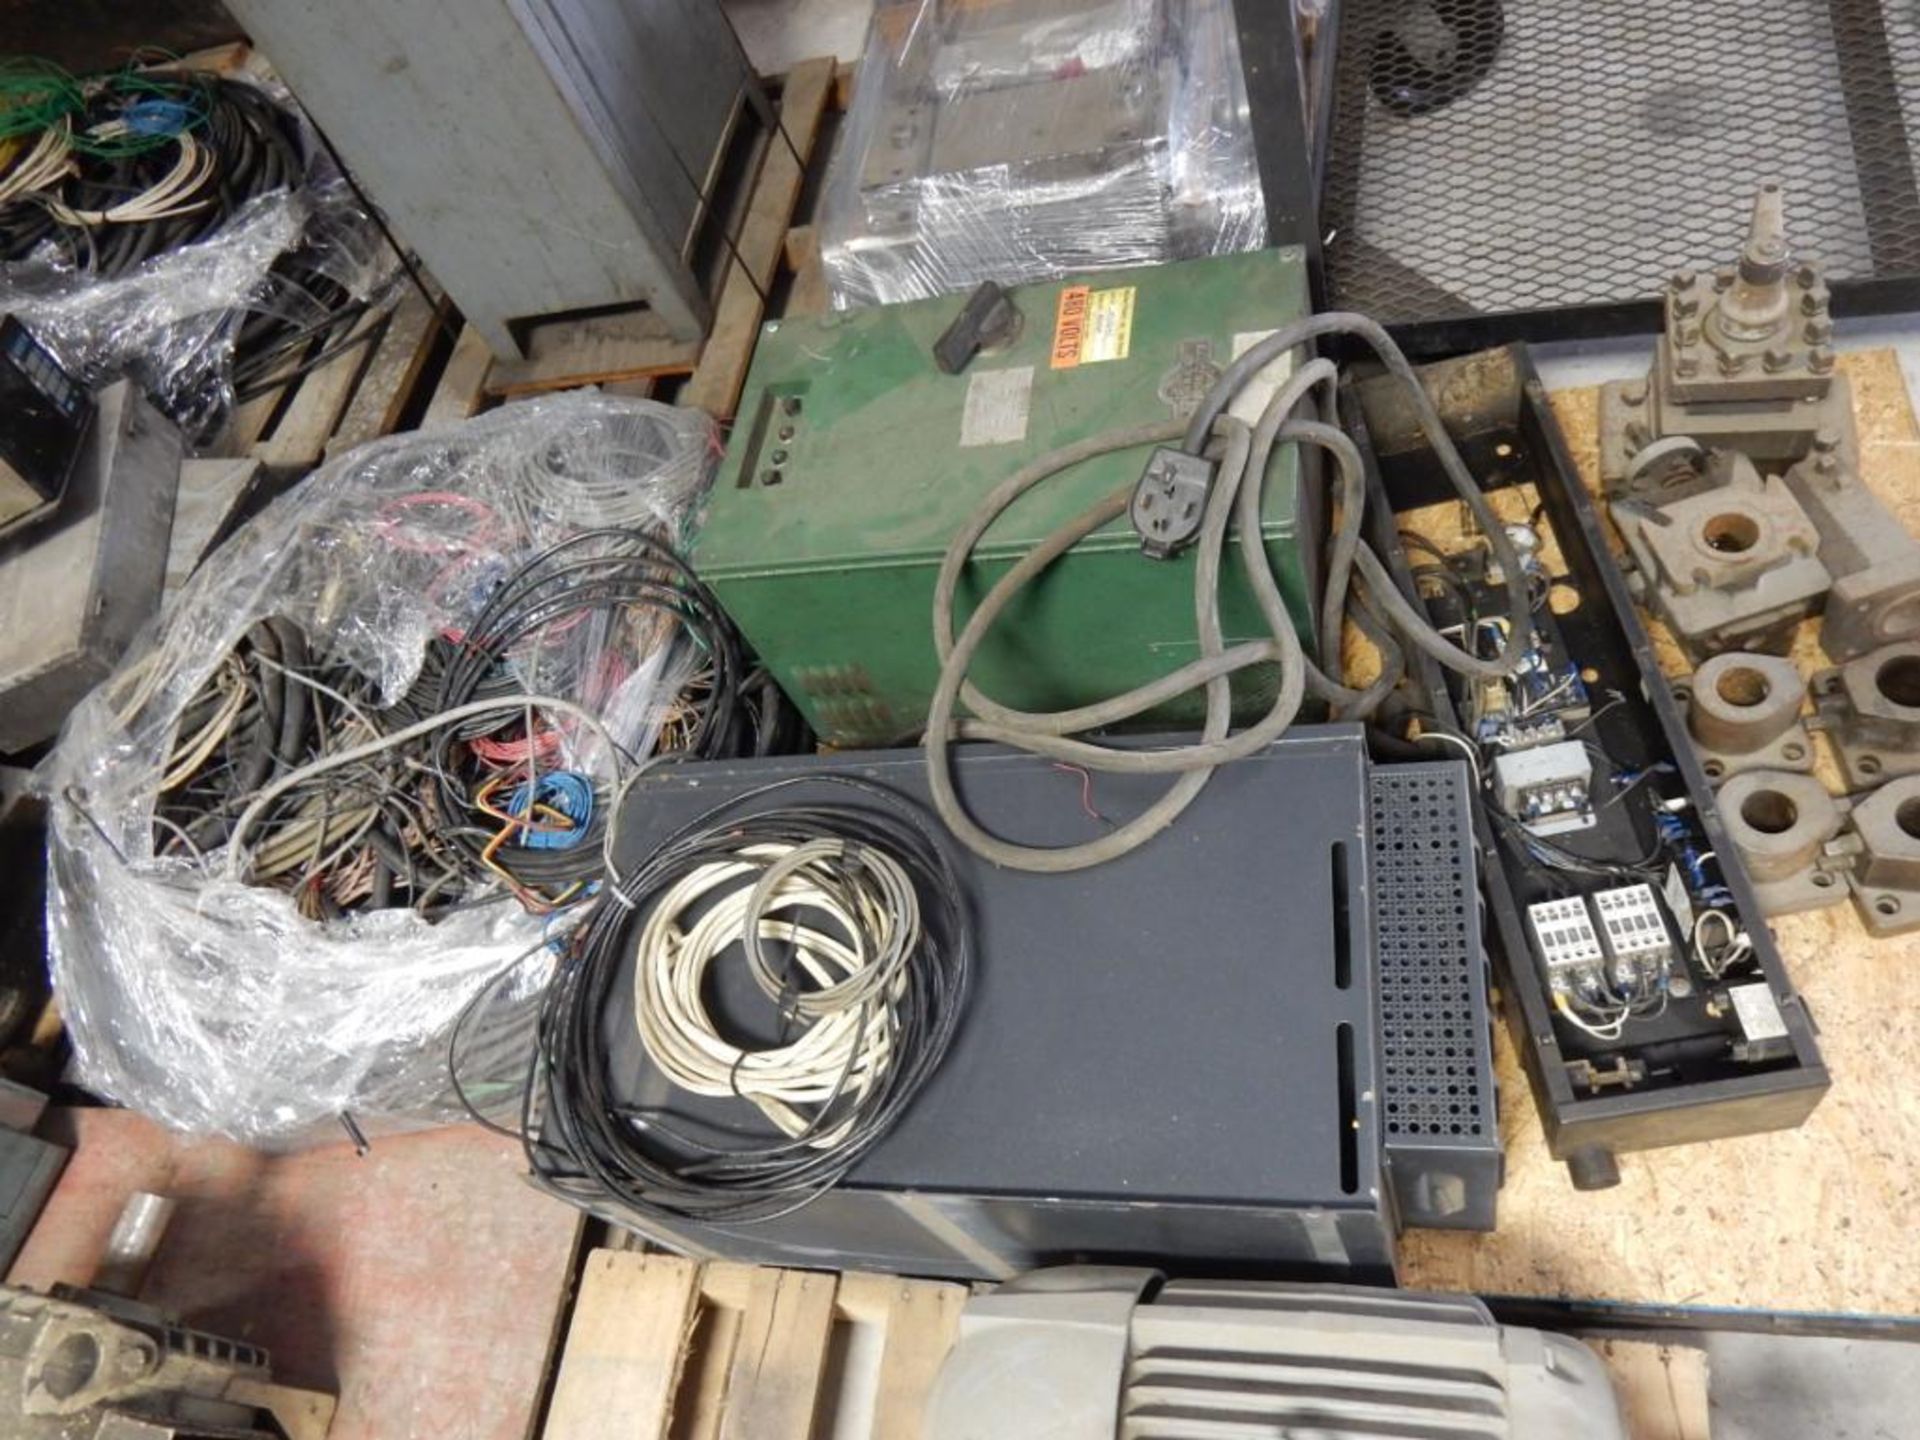 LOT MISC. ELEC. MOTORS, DRIVES, ELECTRICAL BOXES, WIRING, MACHINE PARTS, ETC. - Image 4 of 6